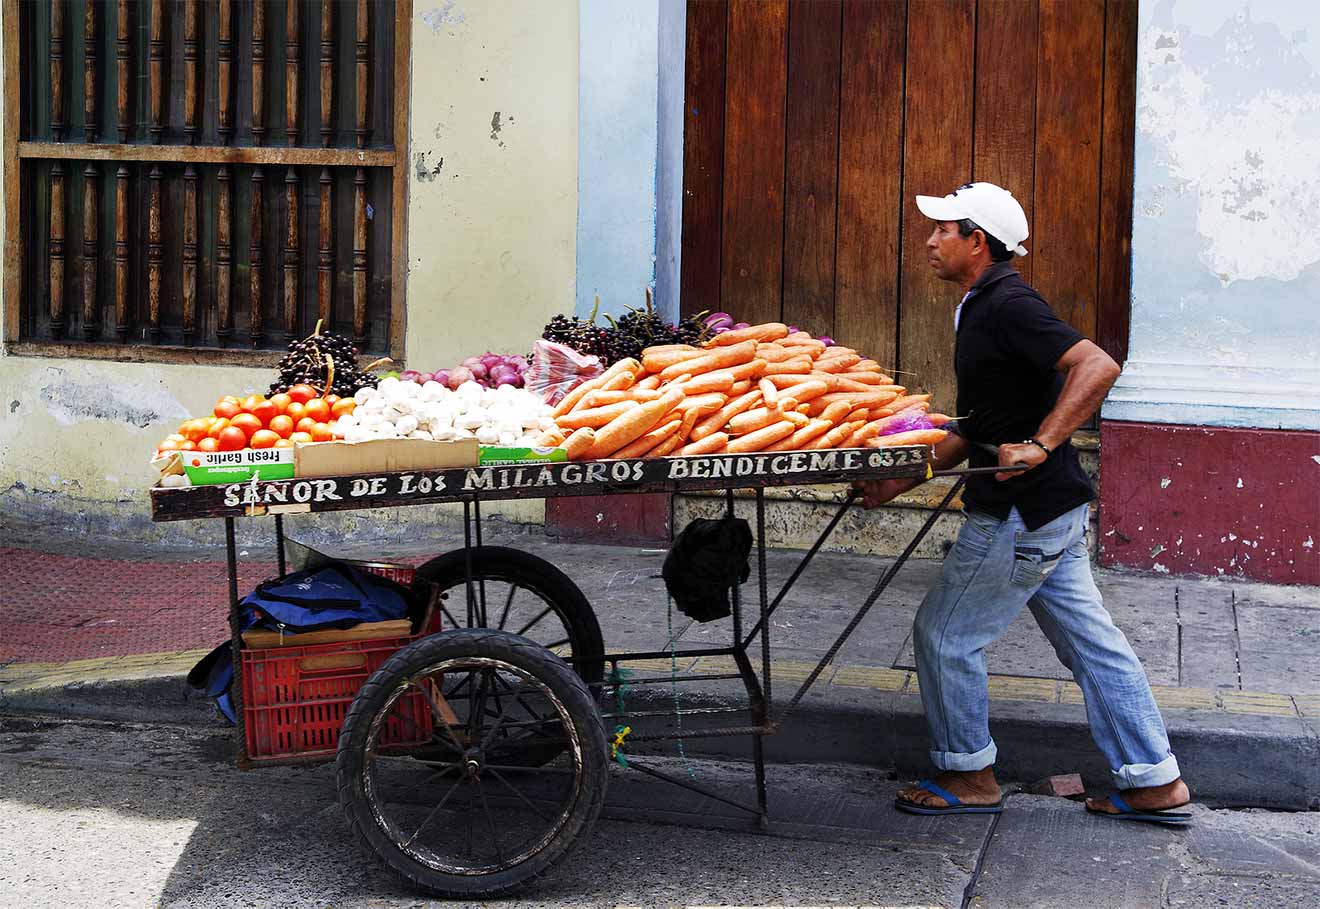 Street vendor pushing a cart laden with fresh carrots, onions, and other produce, a snapshot of local entrepreneurship and daily commerce in action